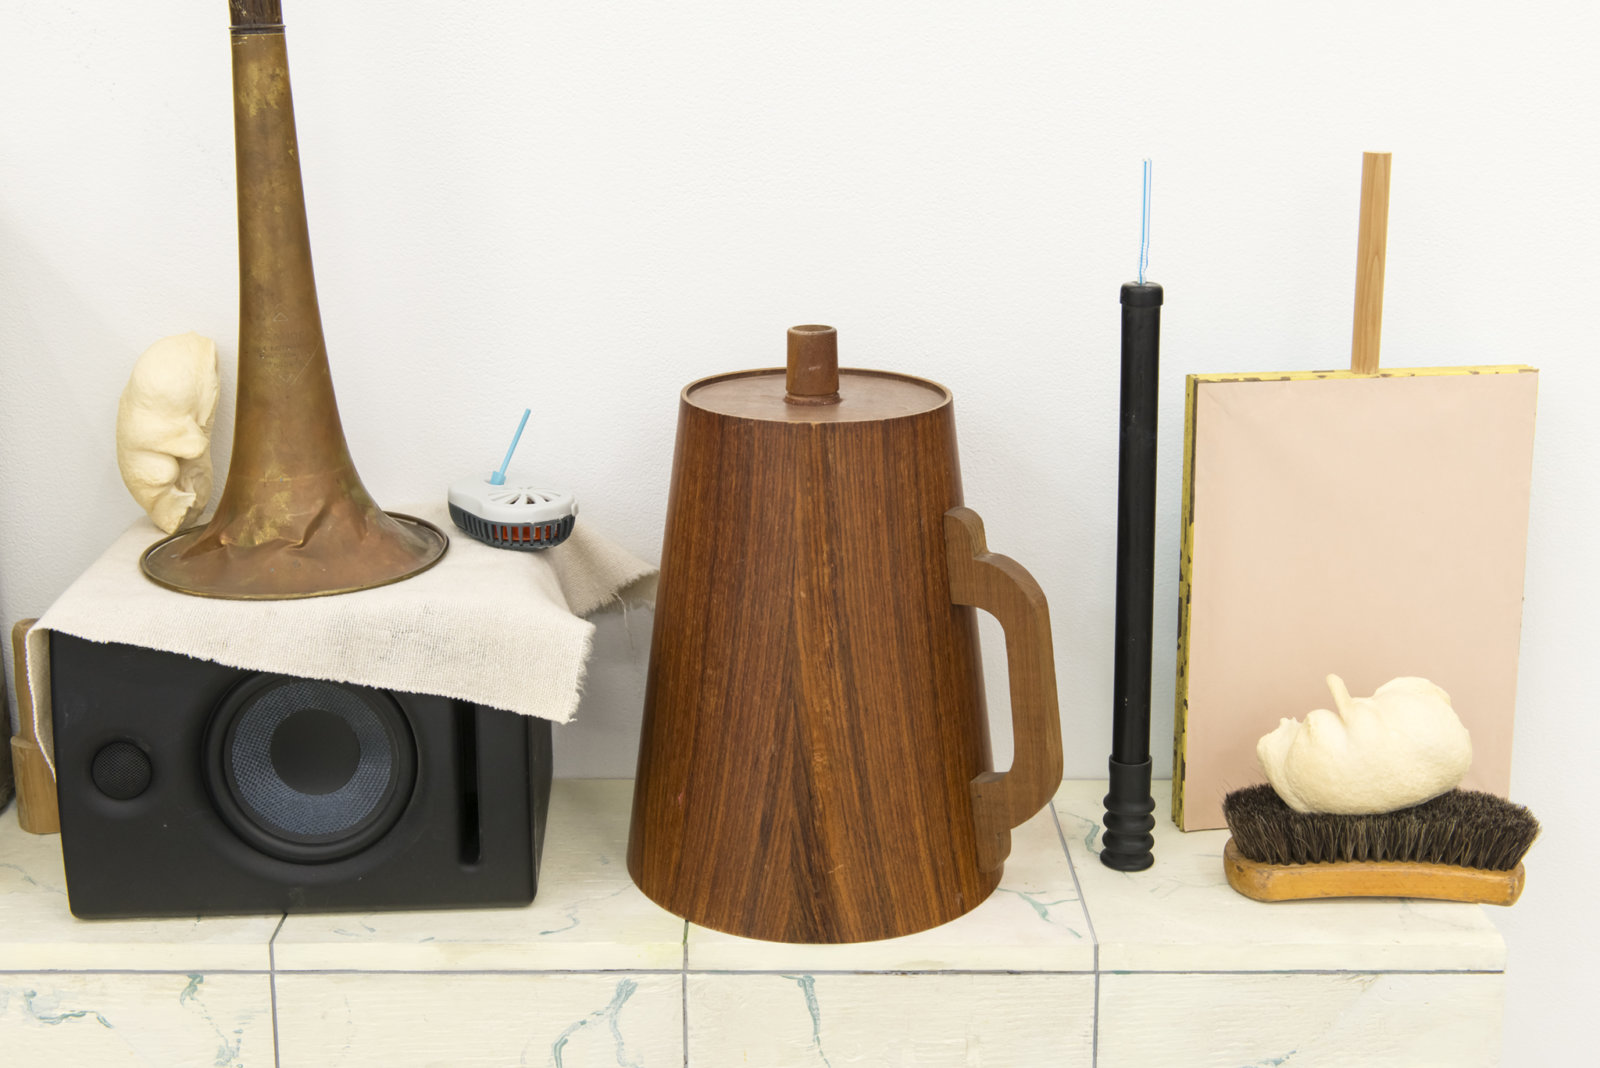 Ashes Withyman, Furnas, Compass, Altar, Musca, River, Cetus, Cup (detail), 2017–2018, tool box, styrofoam cup, mallet, brass horn, bullae, mosquito repelling devices, shoe brush, paper, wood, brass, animal call parts, musical instrument parts, pump, speaker, painted plywood, 34 x 63 x 14 in. (86 x 160 x 34 cm)